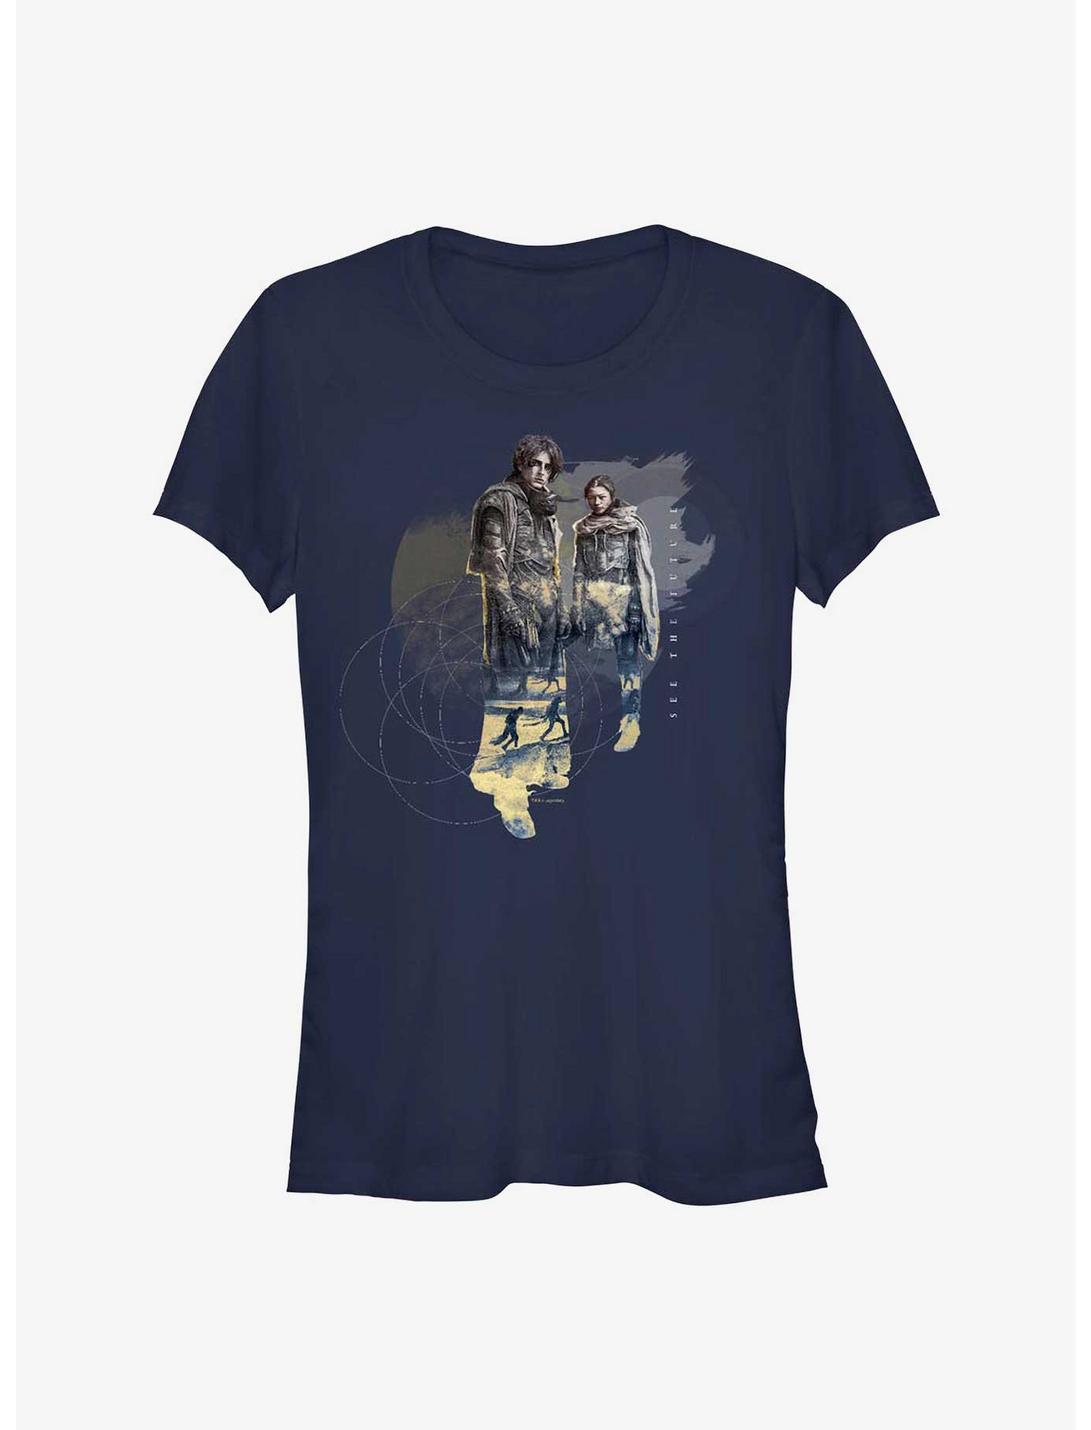 Dune See The Future Girls T-Shirt, NAVY, hi-res